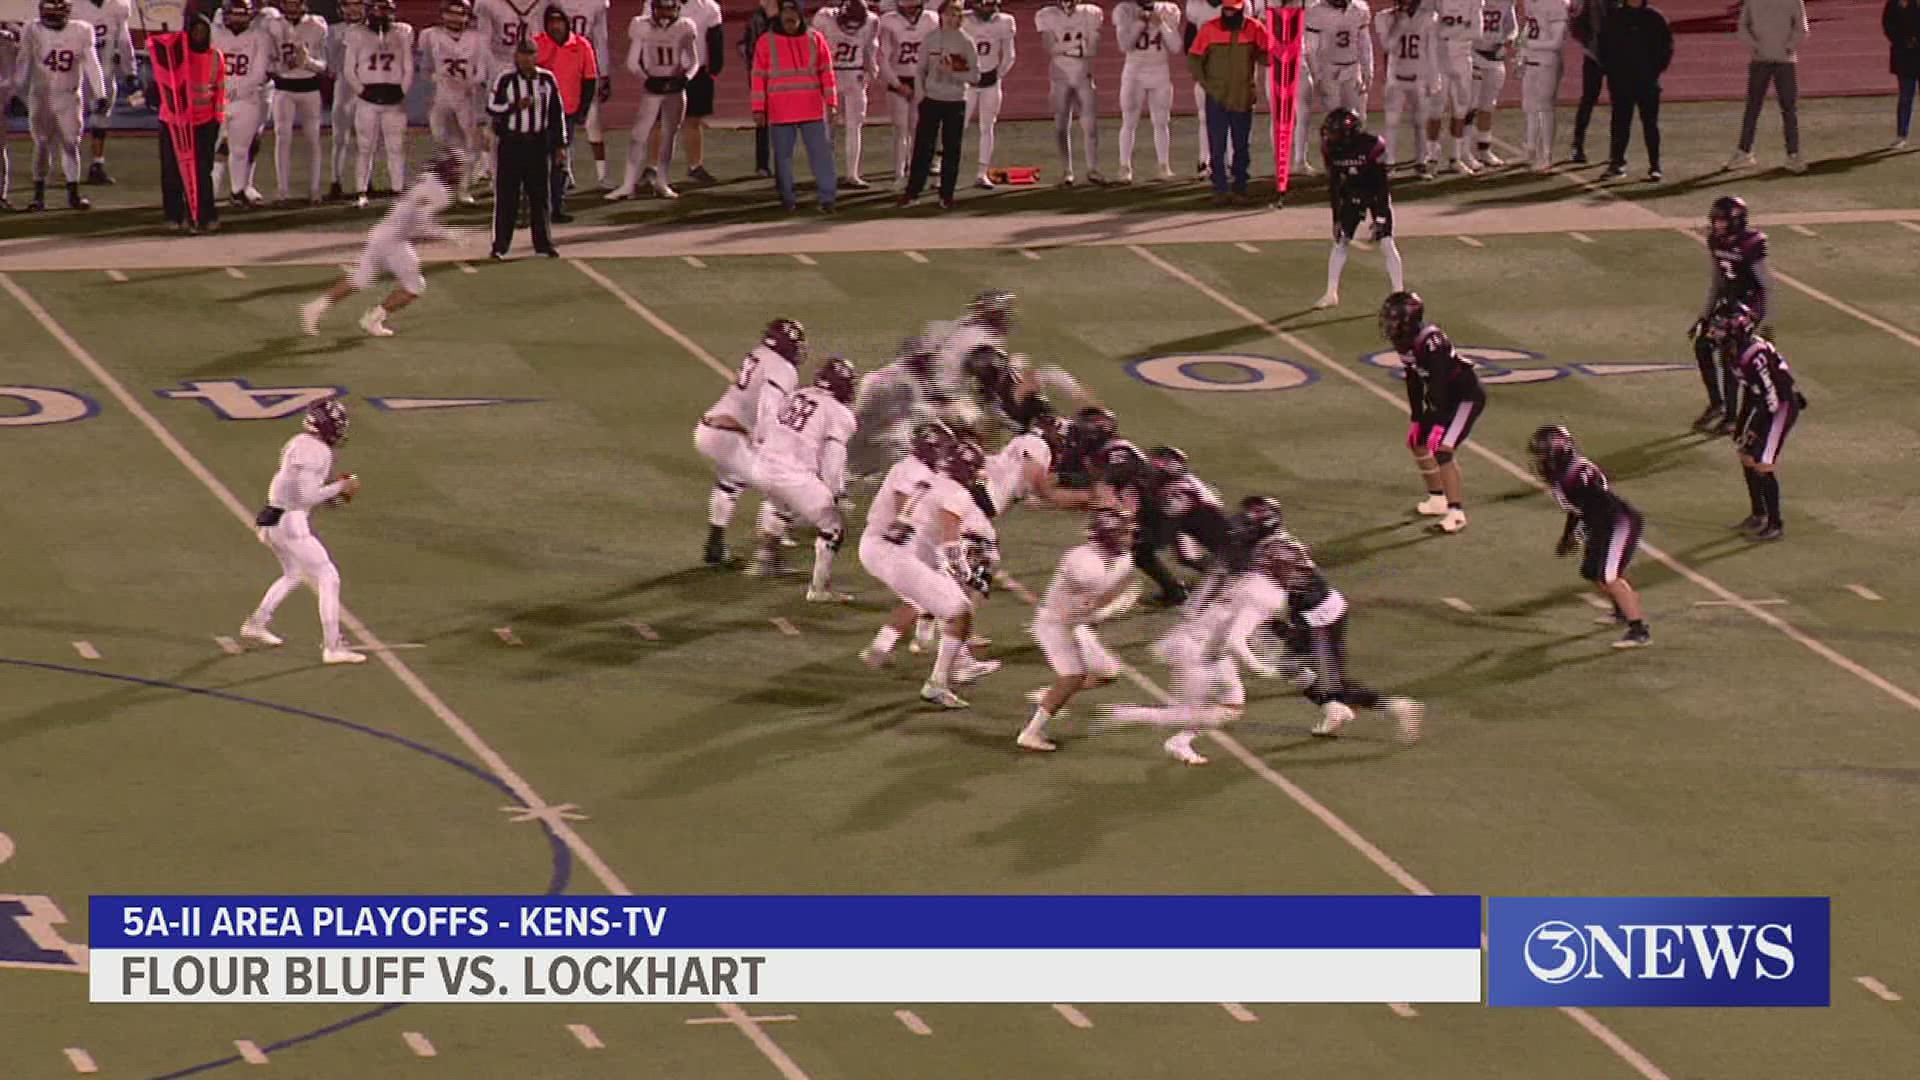 Flour Bluff held off a late Lockhart surge while Calallen put up two second half scores to advance.